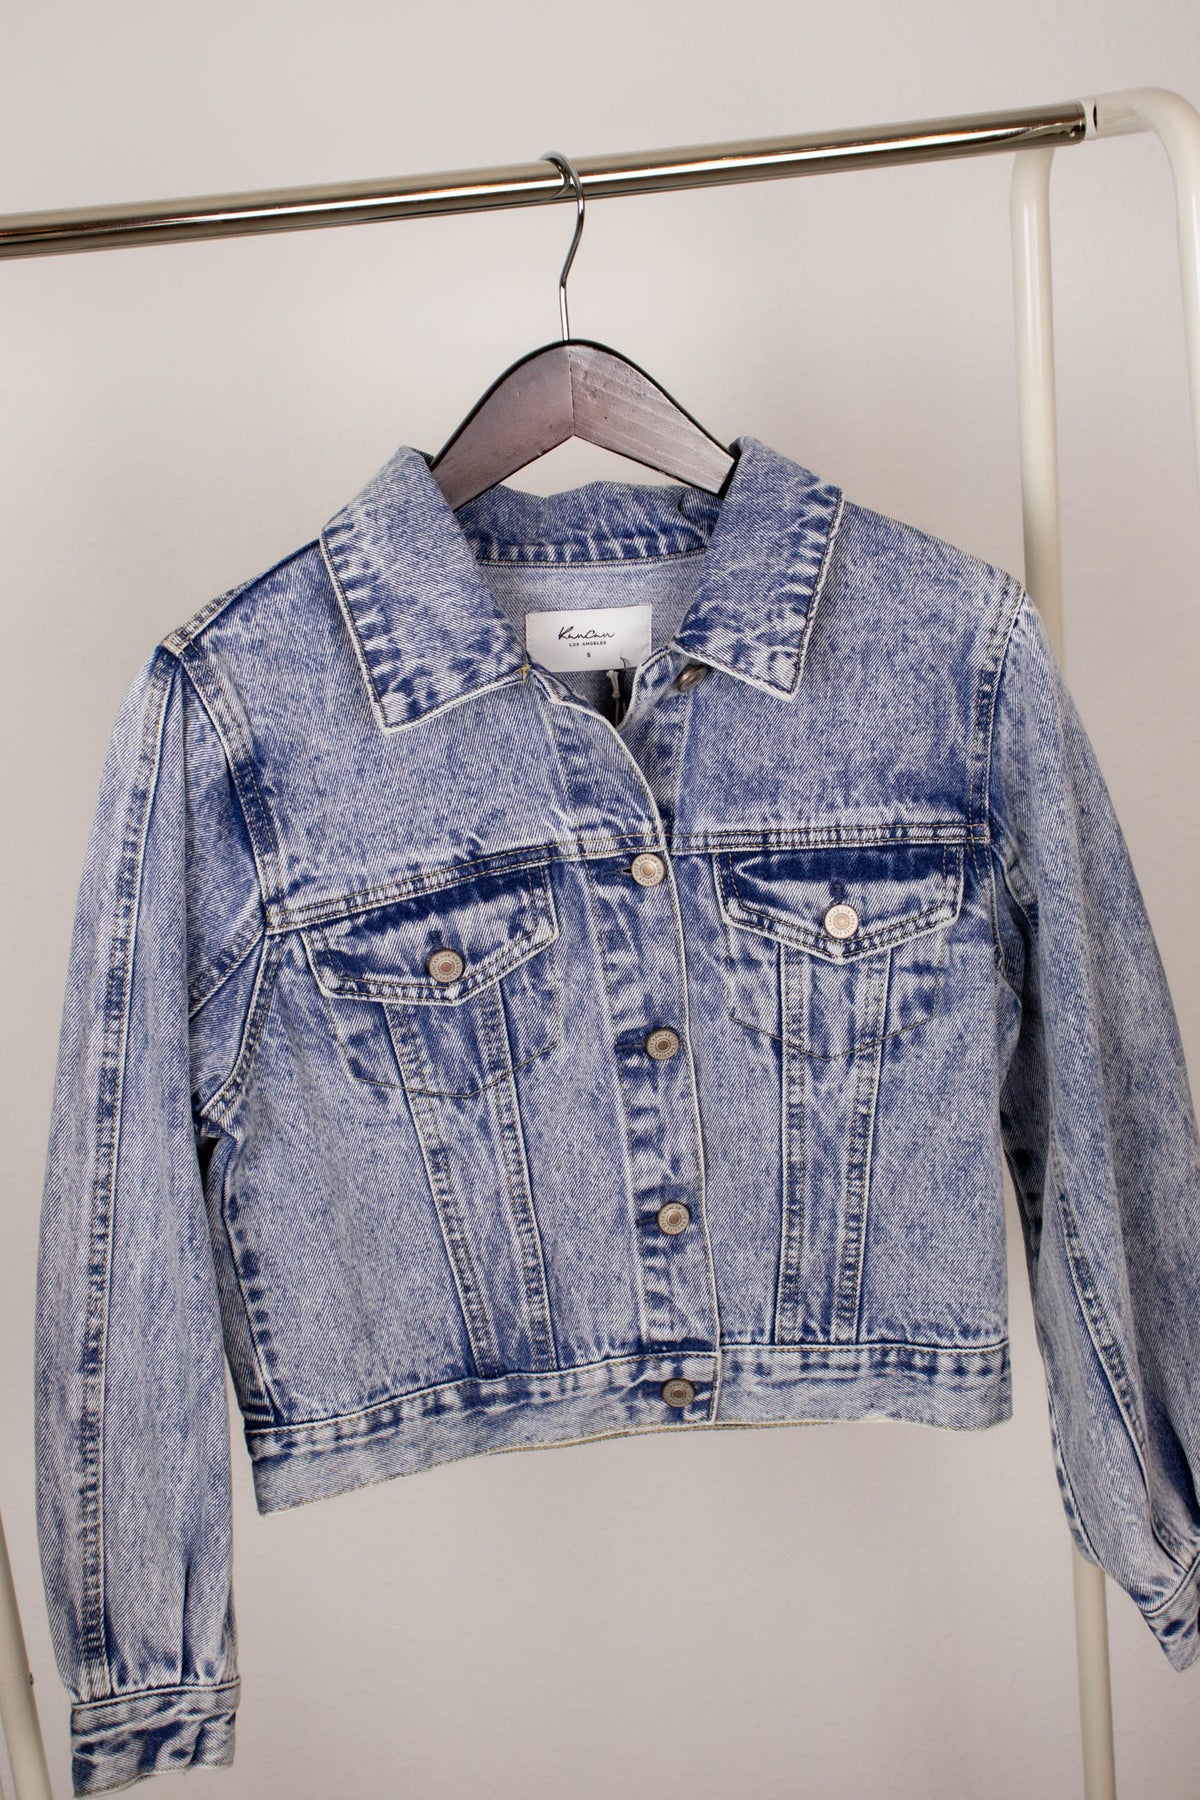 Justice Balloon Sleeve Denim Jacket KanCan Shop now to discover